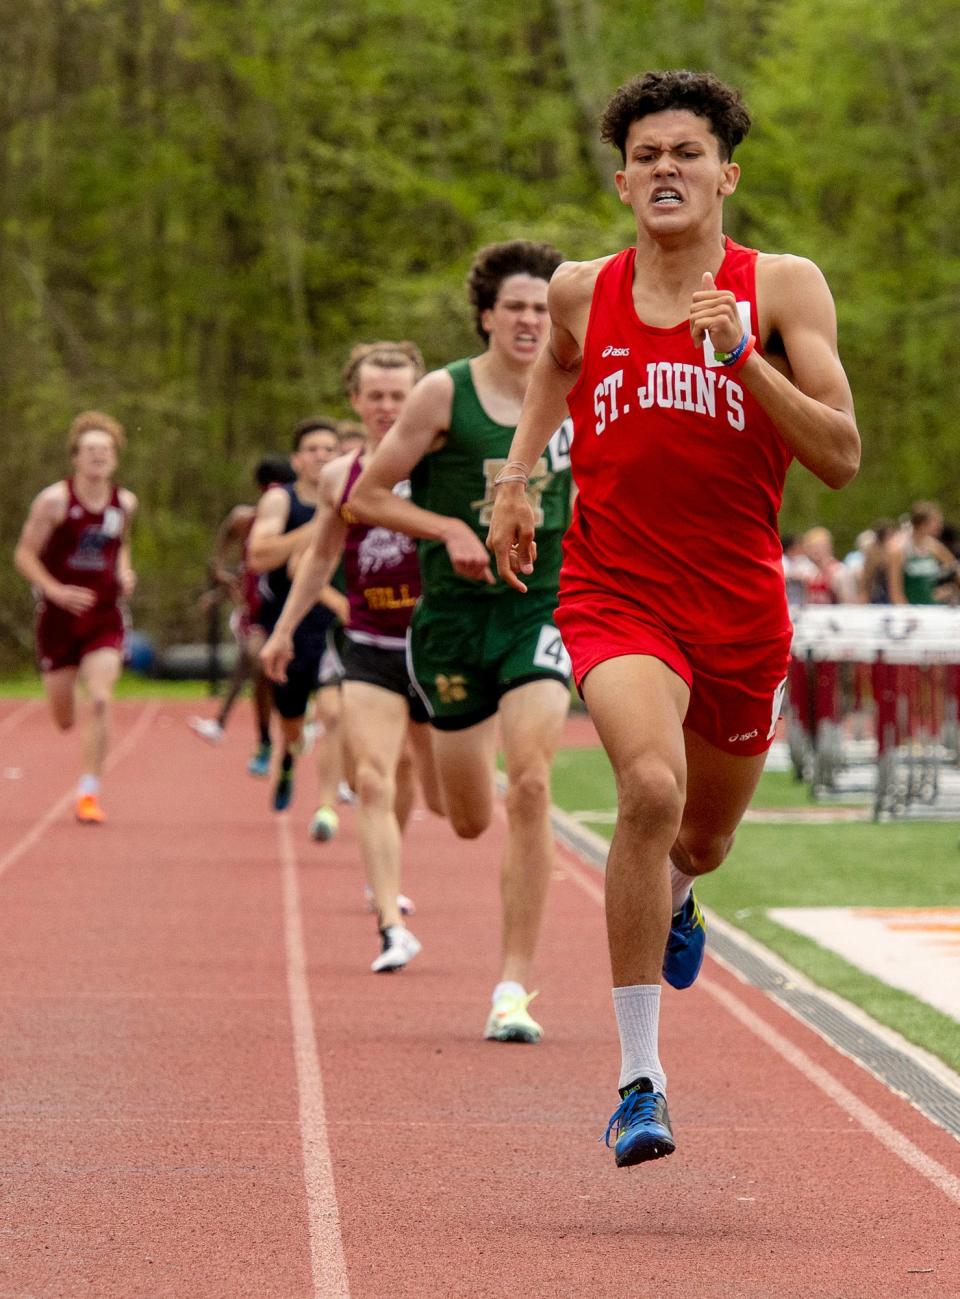 St. John's junior Lucas Carvalho won in the 800 meters at the District E Division 1 Championships last Saturday at Shepherd Hill.